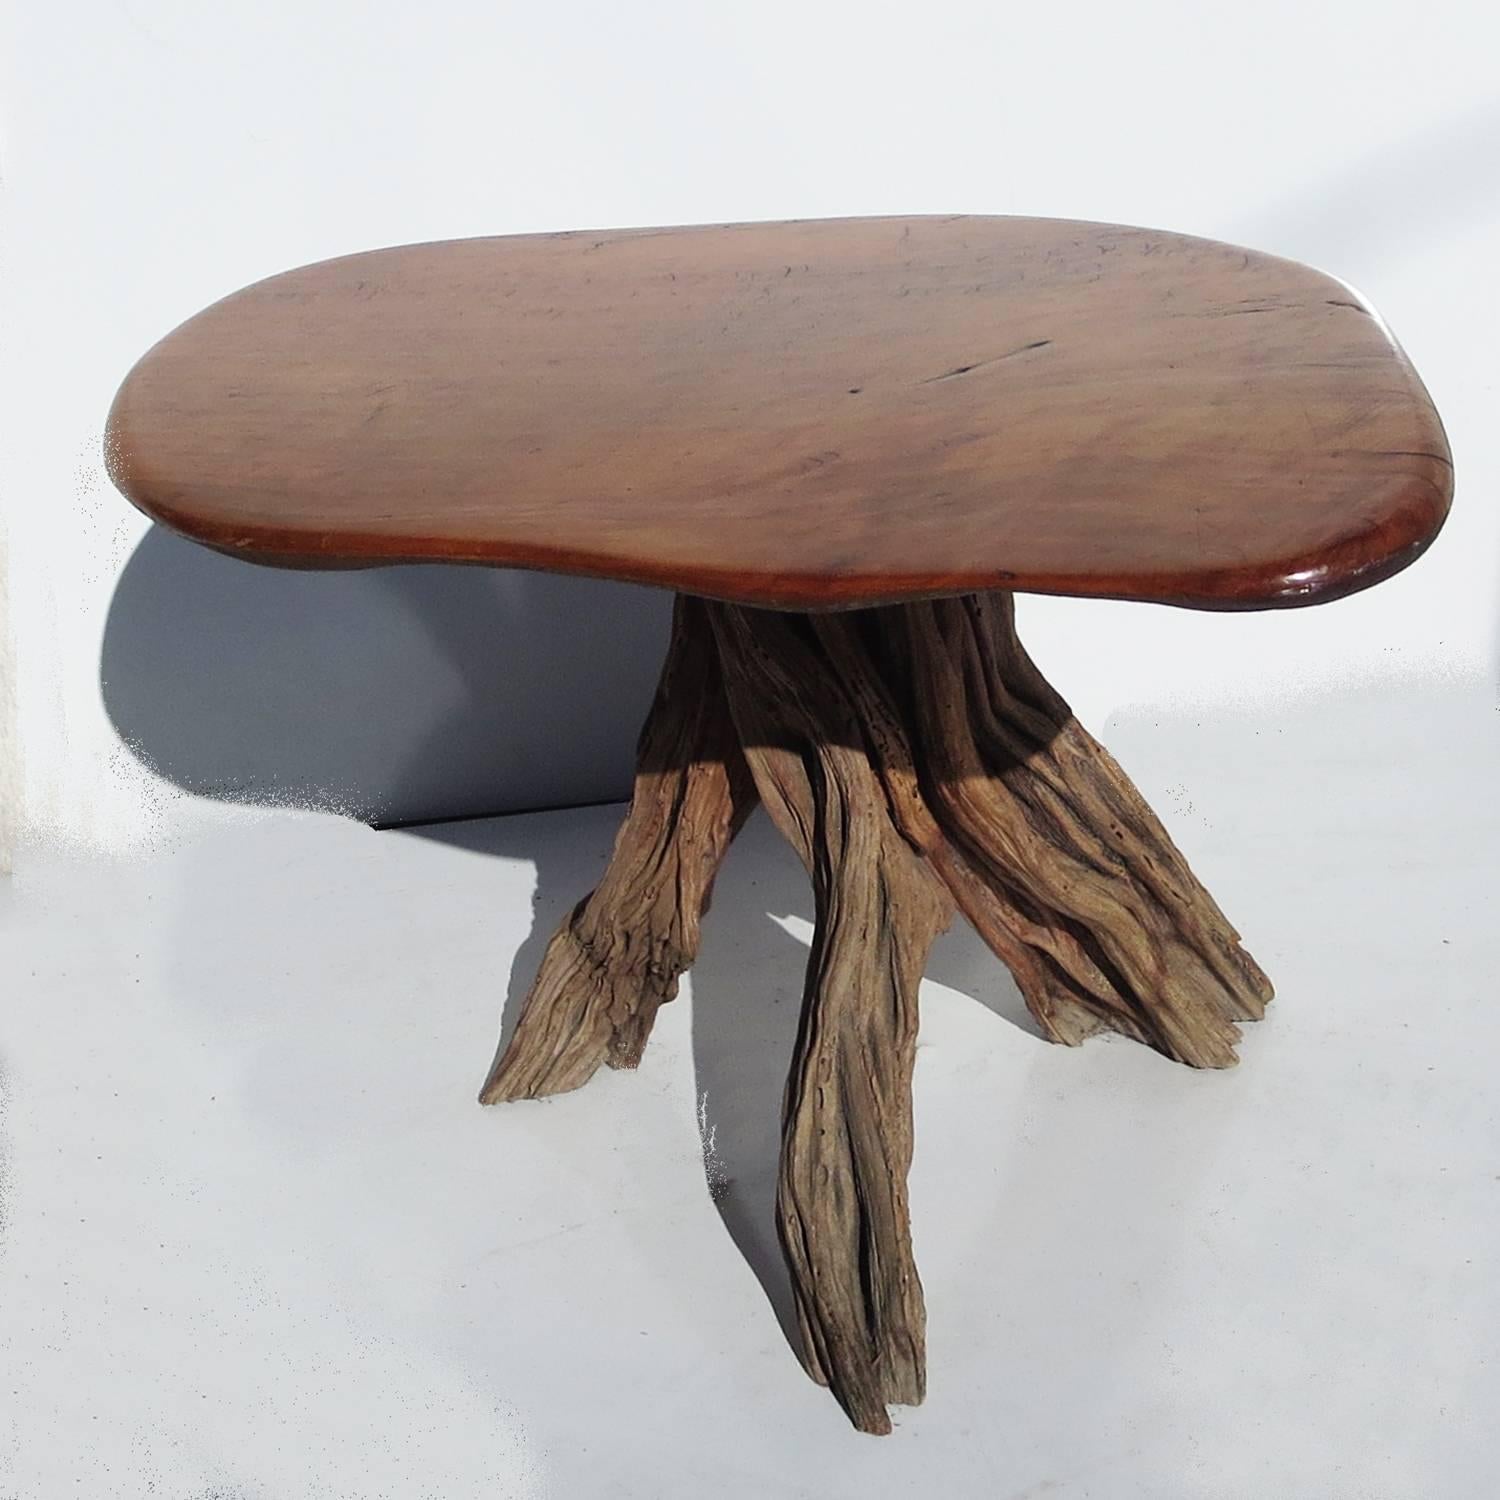 A lovely table from the 1960s, featuring a finished live edge burled top and unfinished stump base. The top is quite thick and solid and the table has substantial weight. Original finish displays well, with only a small burn in the center of the top.